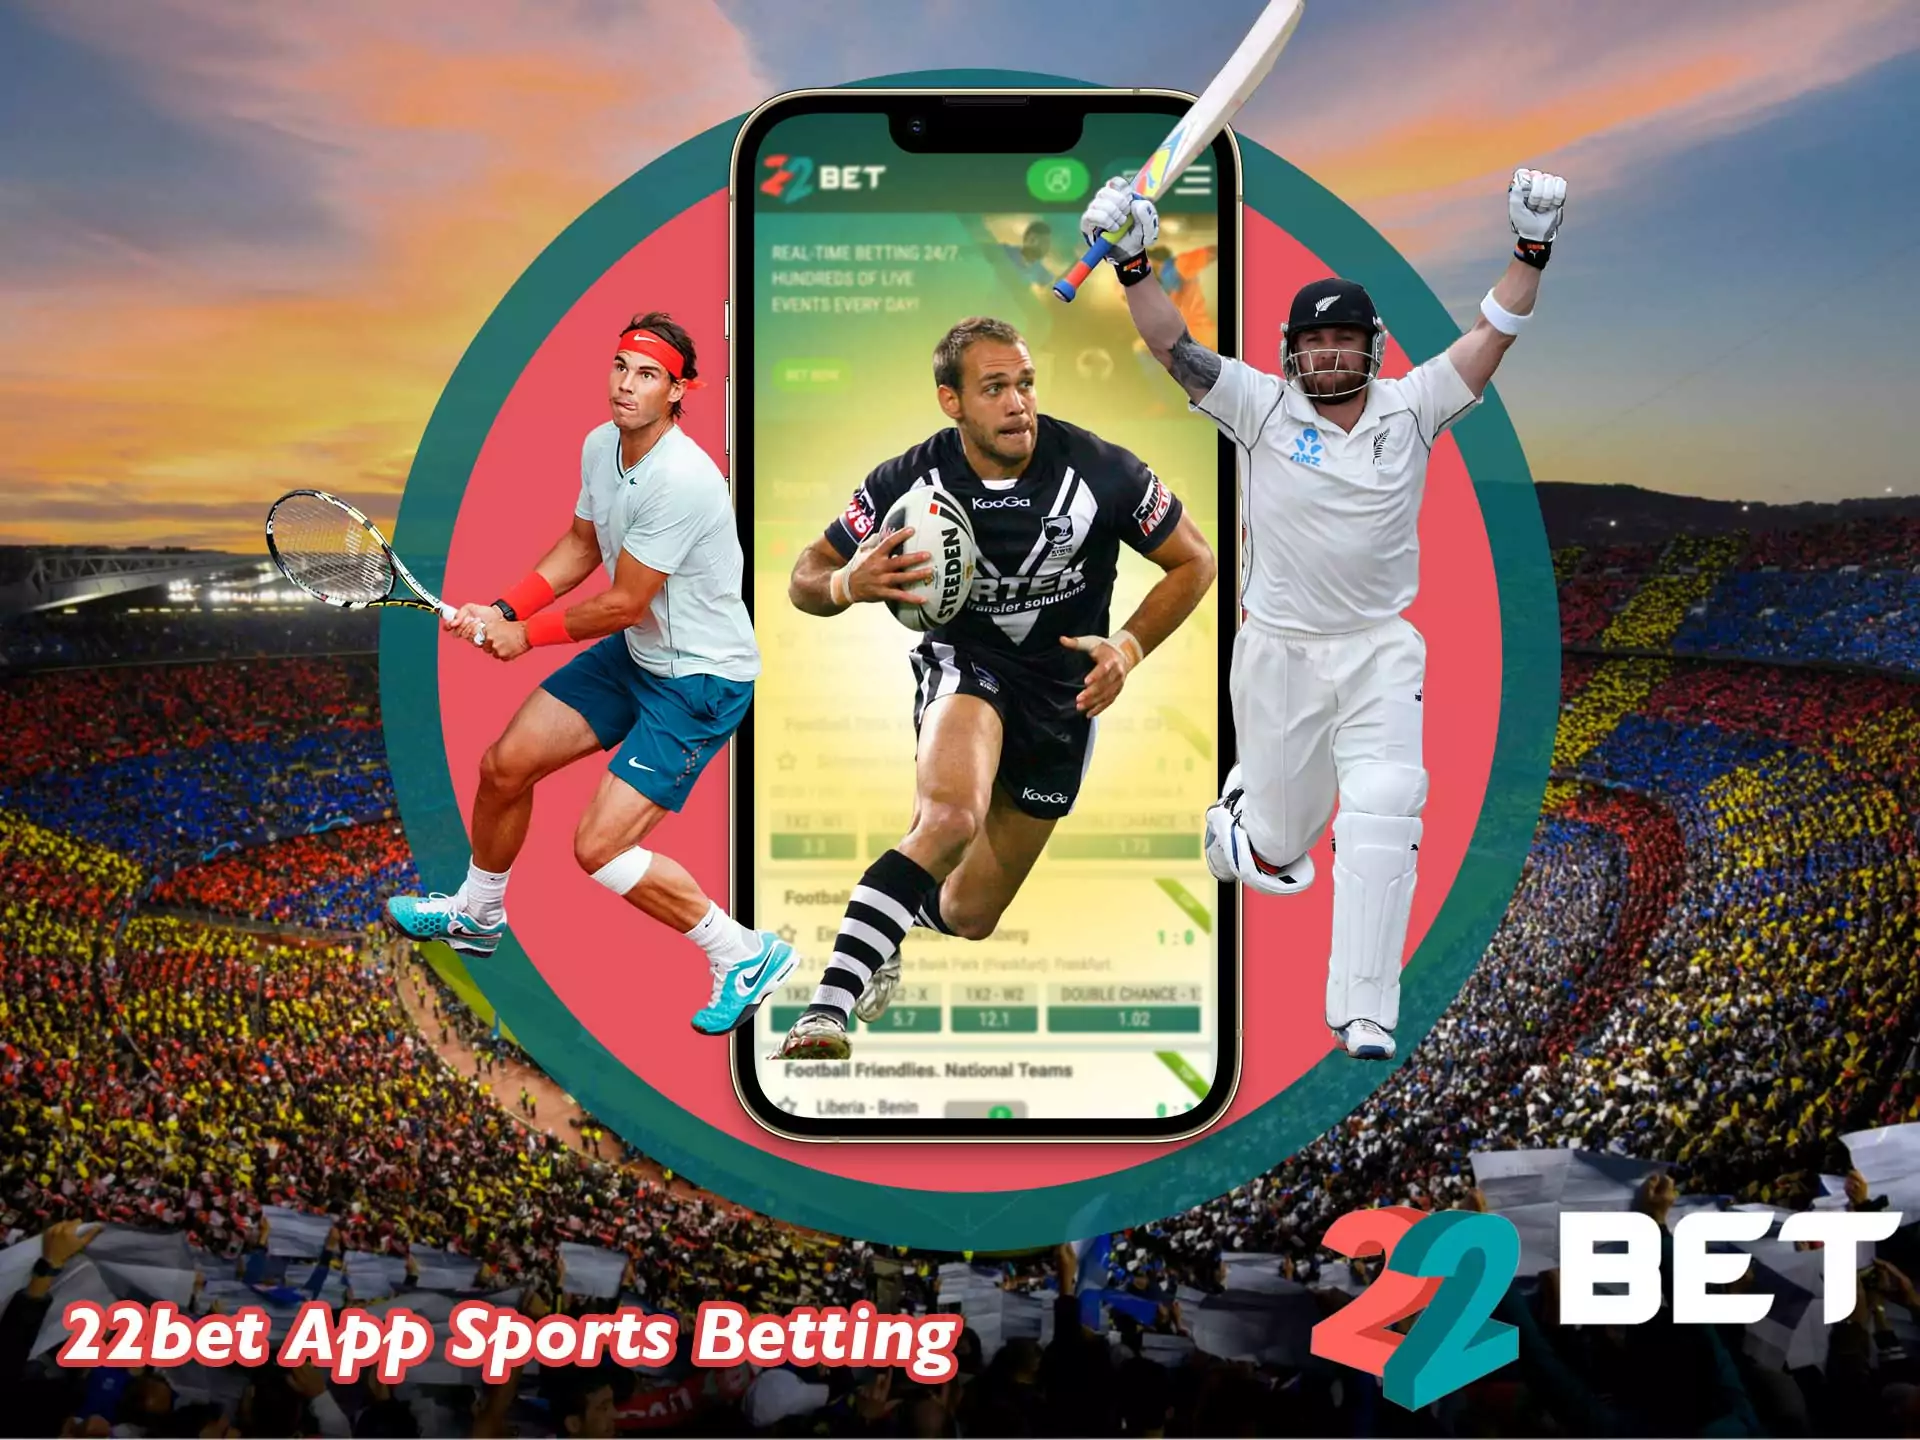 In 22bet betting app many sporting markets, everyone finds something interesting.